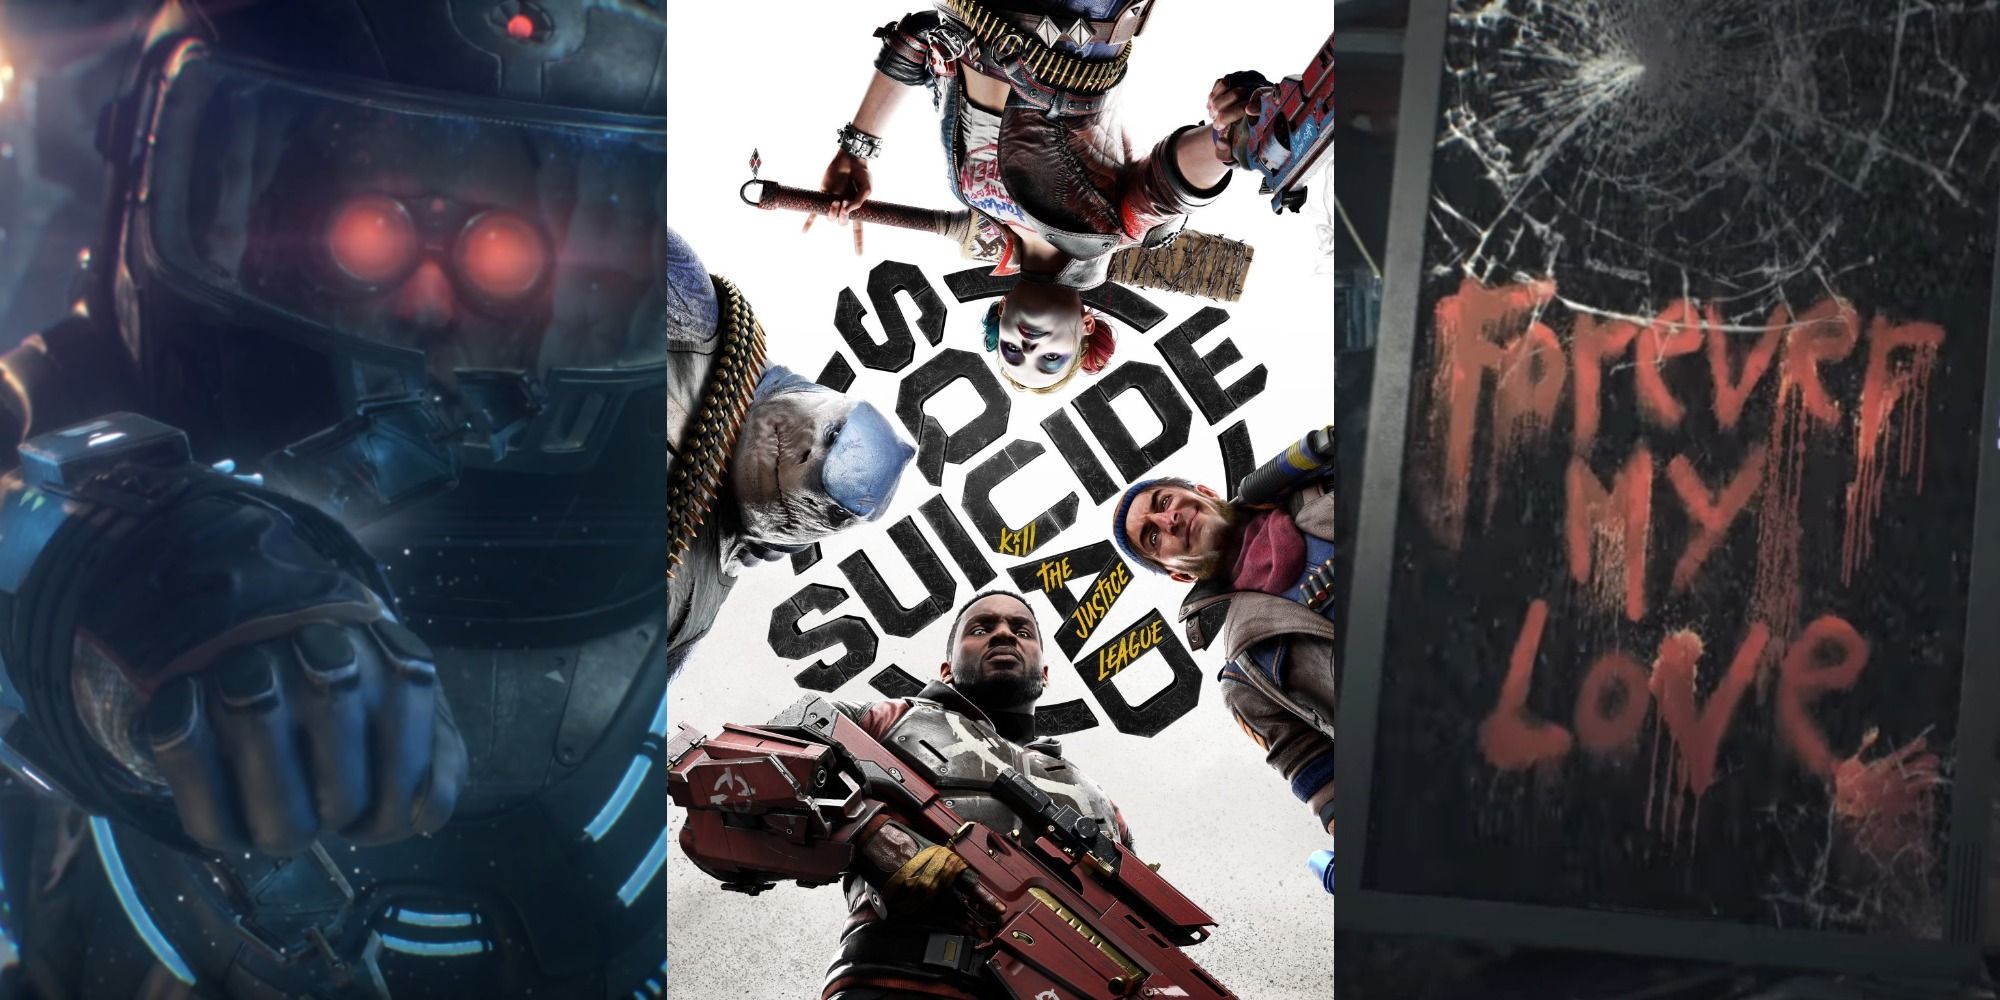 Split image of Mr. Freeze in Arkham Knight, Suicide Squad Kill The Justice League cover, and mysterious bloody message in Batman Arkham Knight